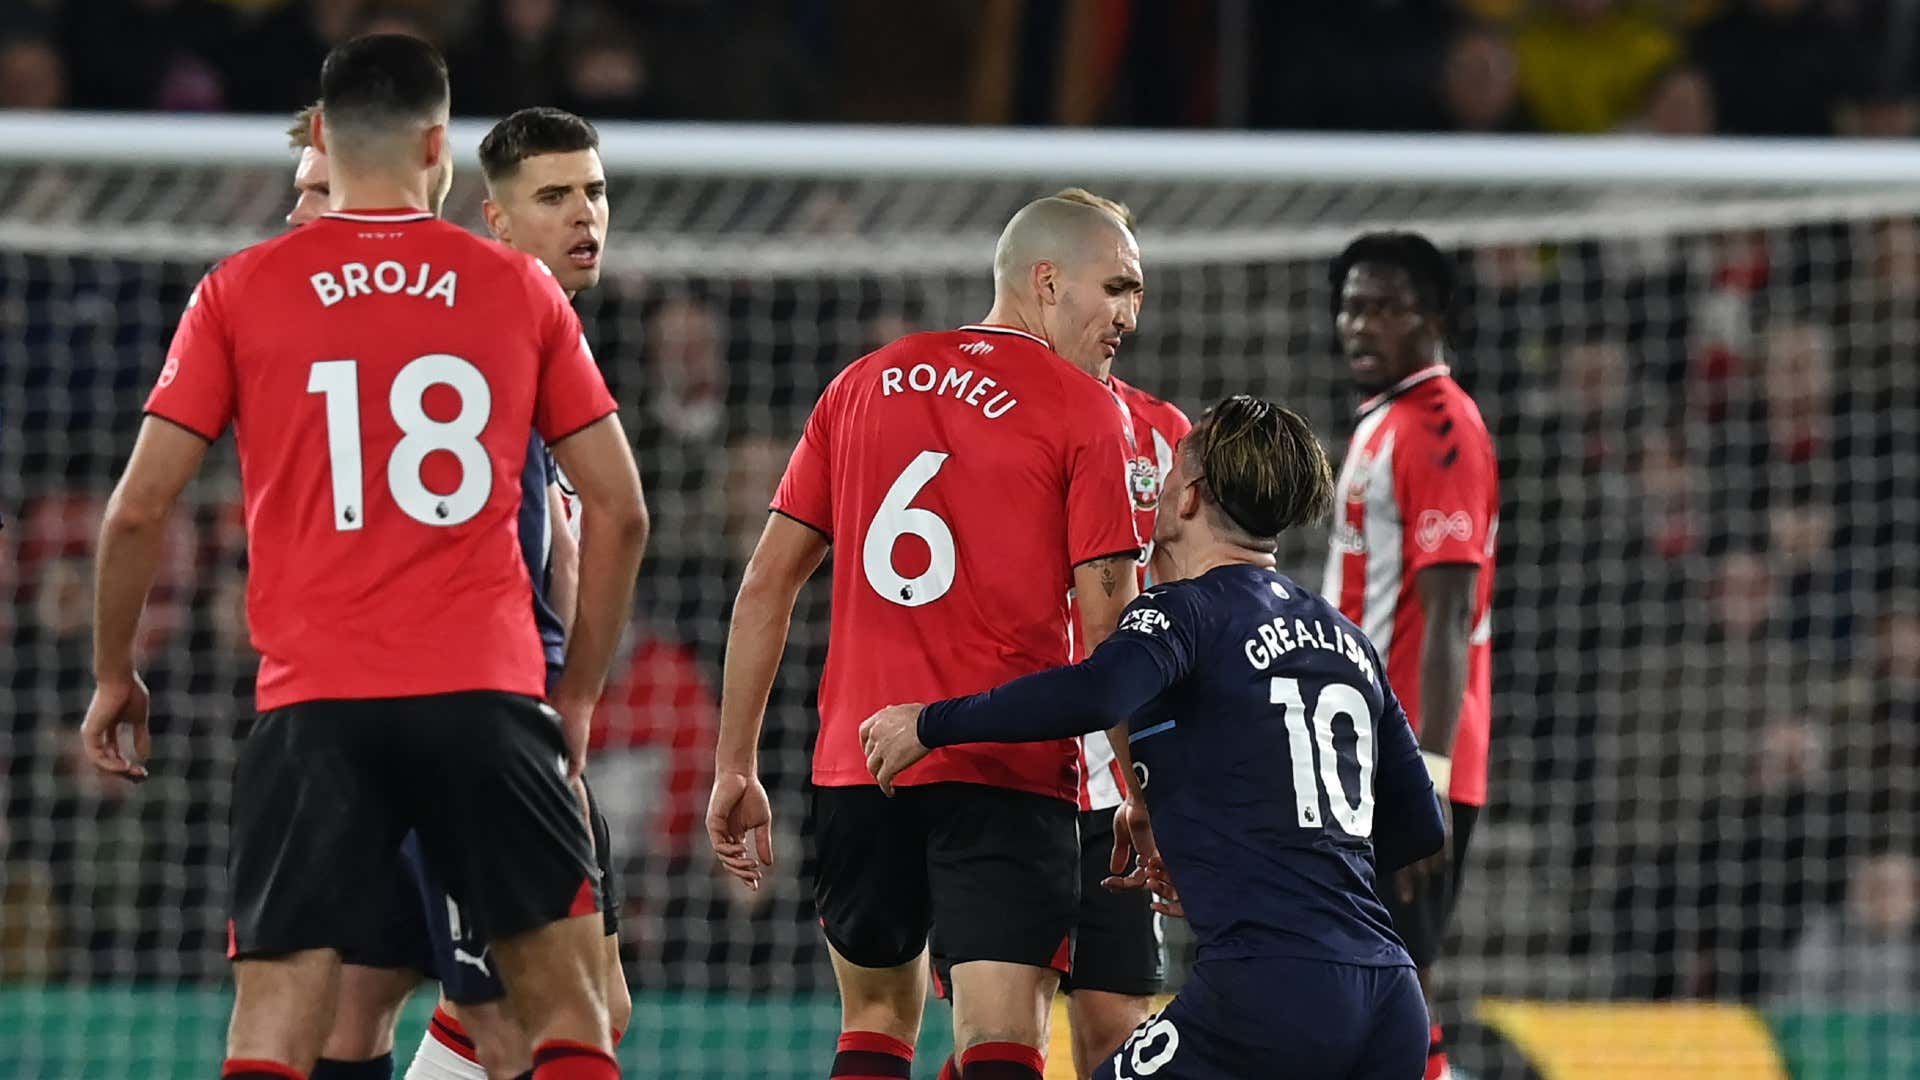 'Grealish was waiting for Romeu in the tunnel!' - Southampton boss Hasenhuttl reveals stormy end to 1-1 draw with Man City | Goal.com